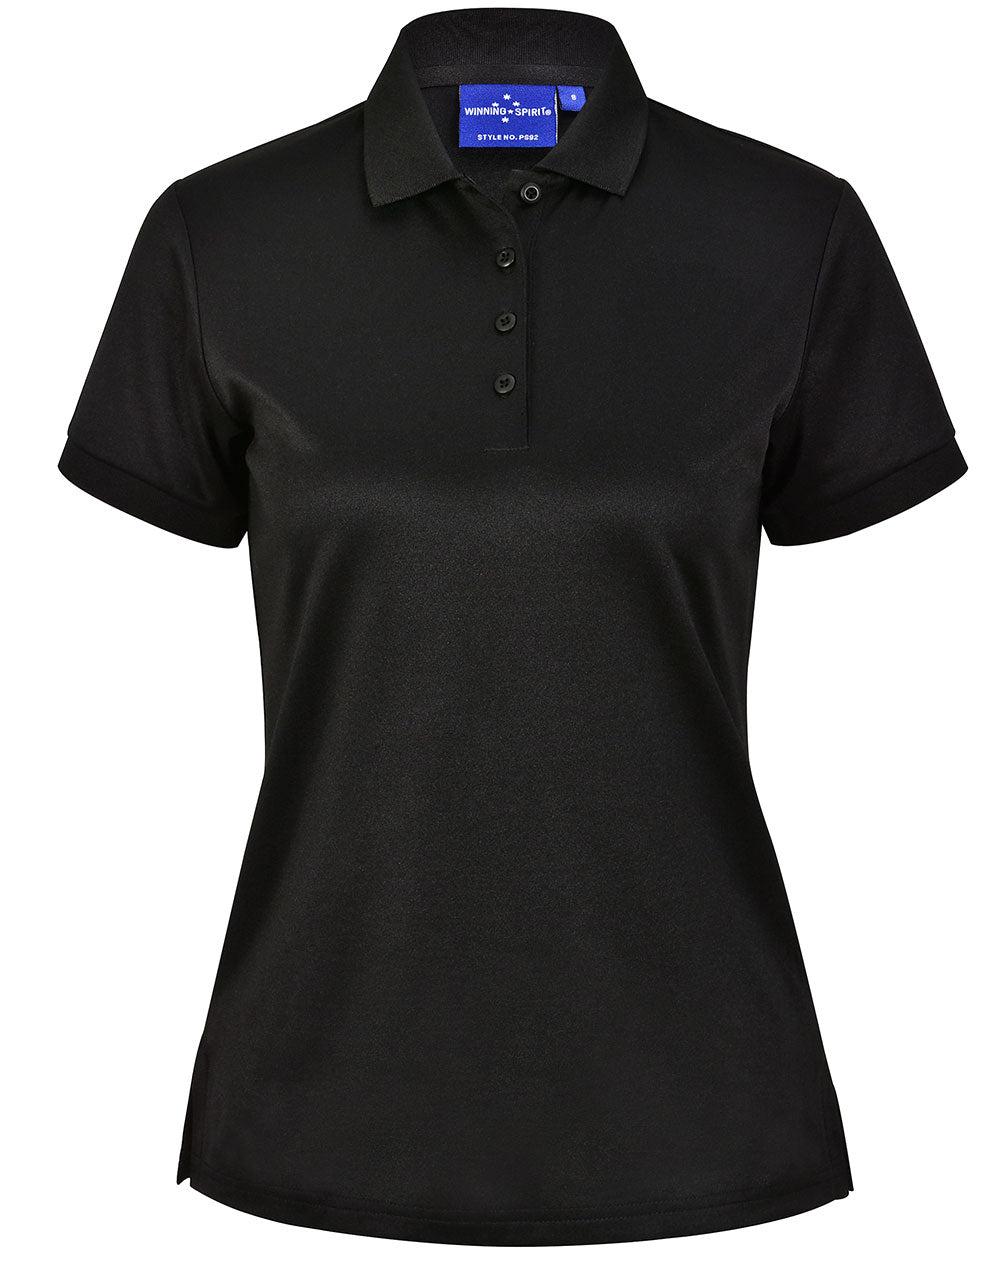 Winning Spirit Ladies Sustainable Poly/Cotton Corporate S/S Polo